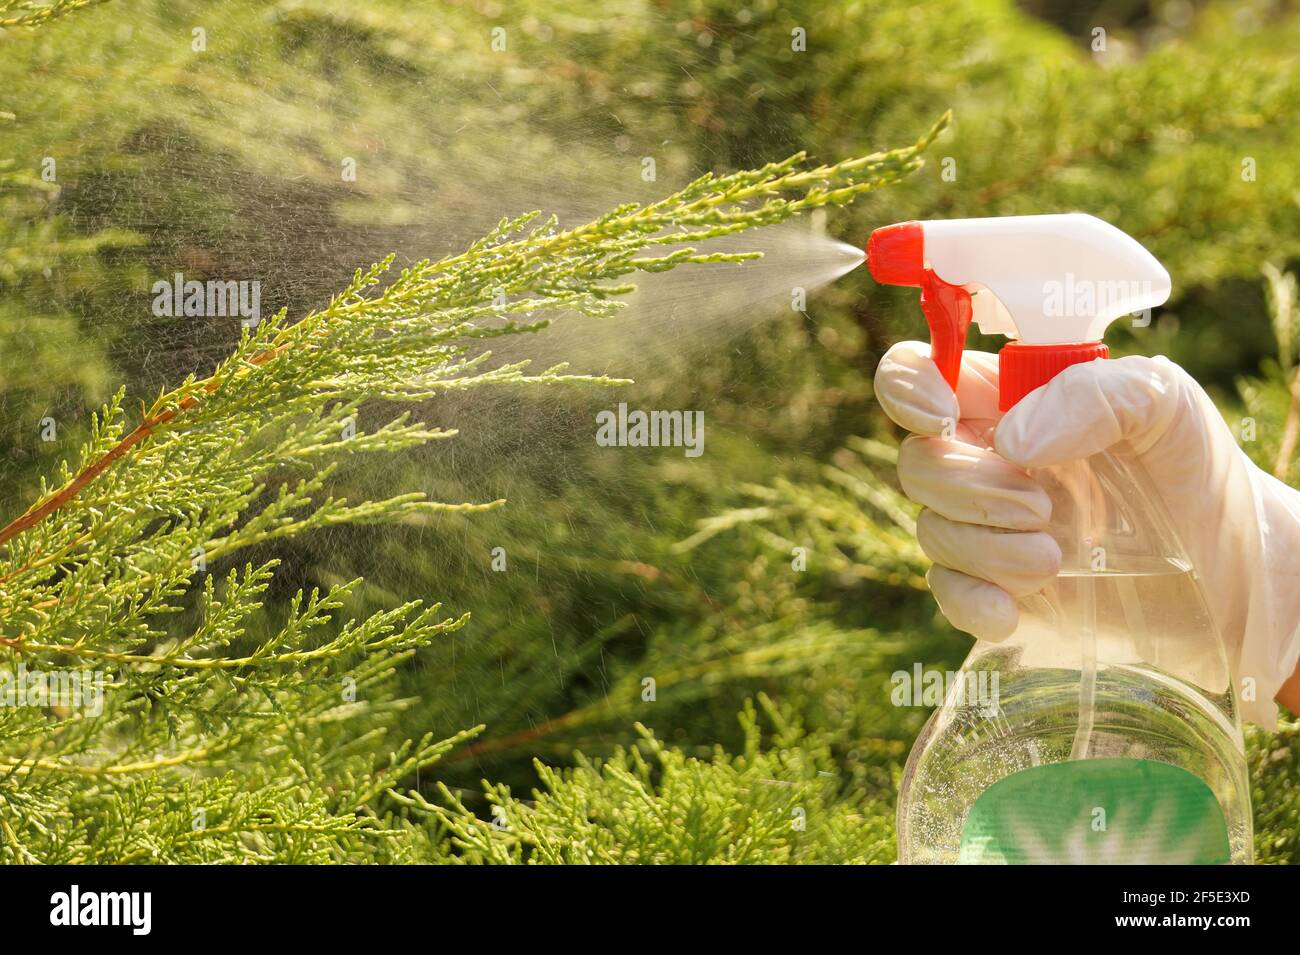 Garden plant care. Spraying against plant diseases. Stock Photo